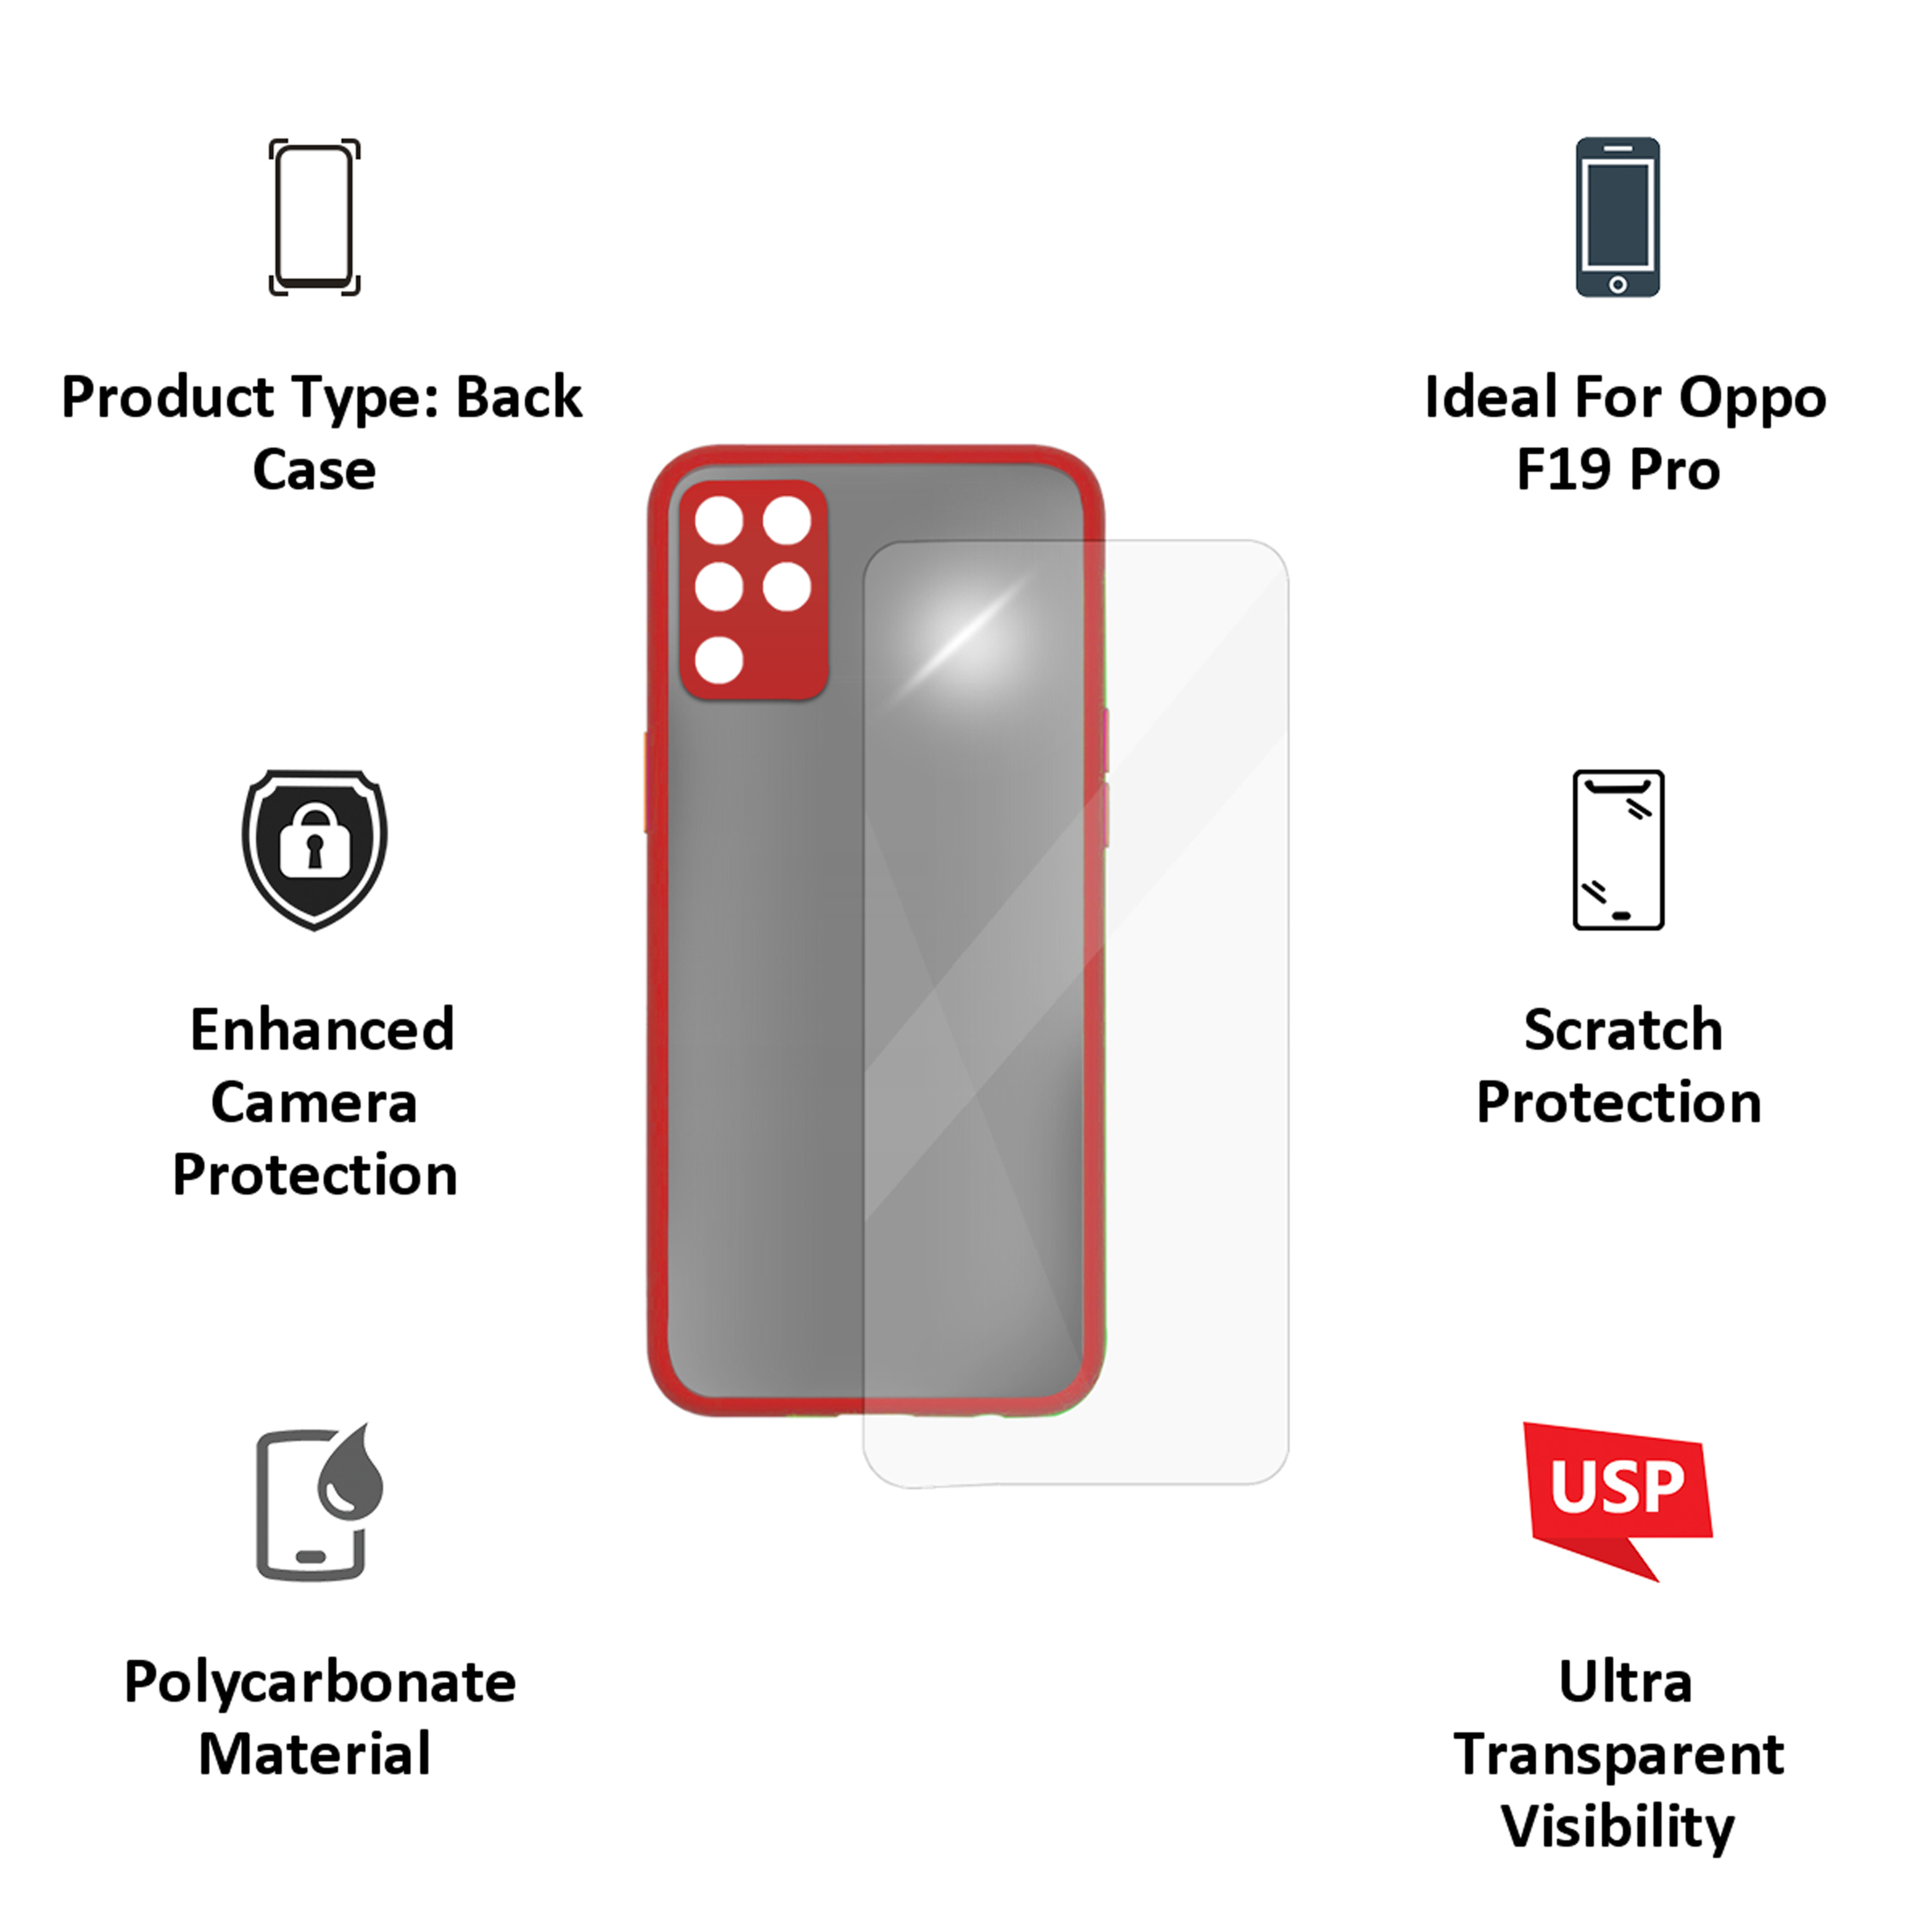 Arrow Camera Duplex Back Case and Screen Protector Bundle For Oppo F19 Pro (Ultra Transparent Visibility, AR-985, Red)_3